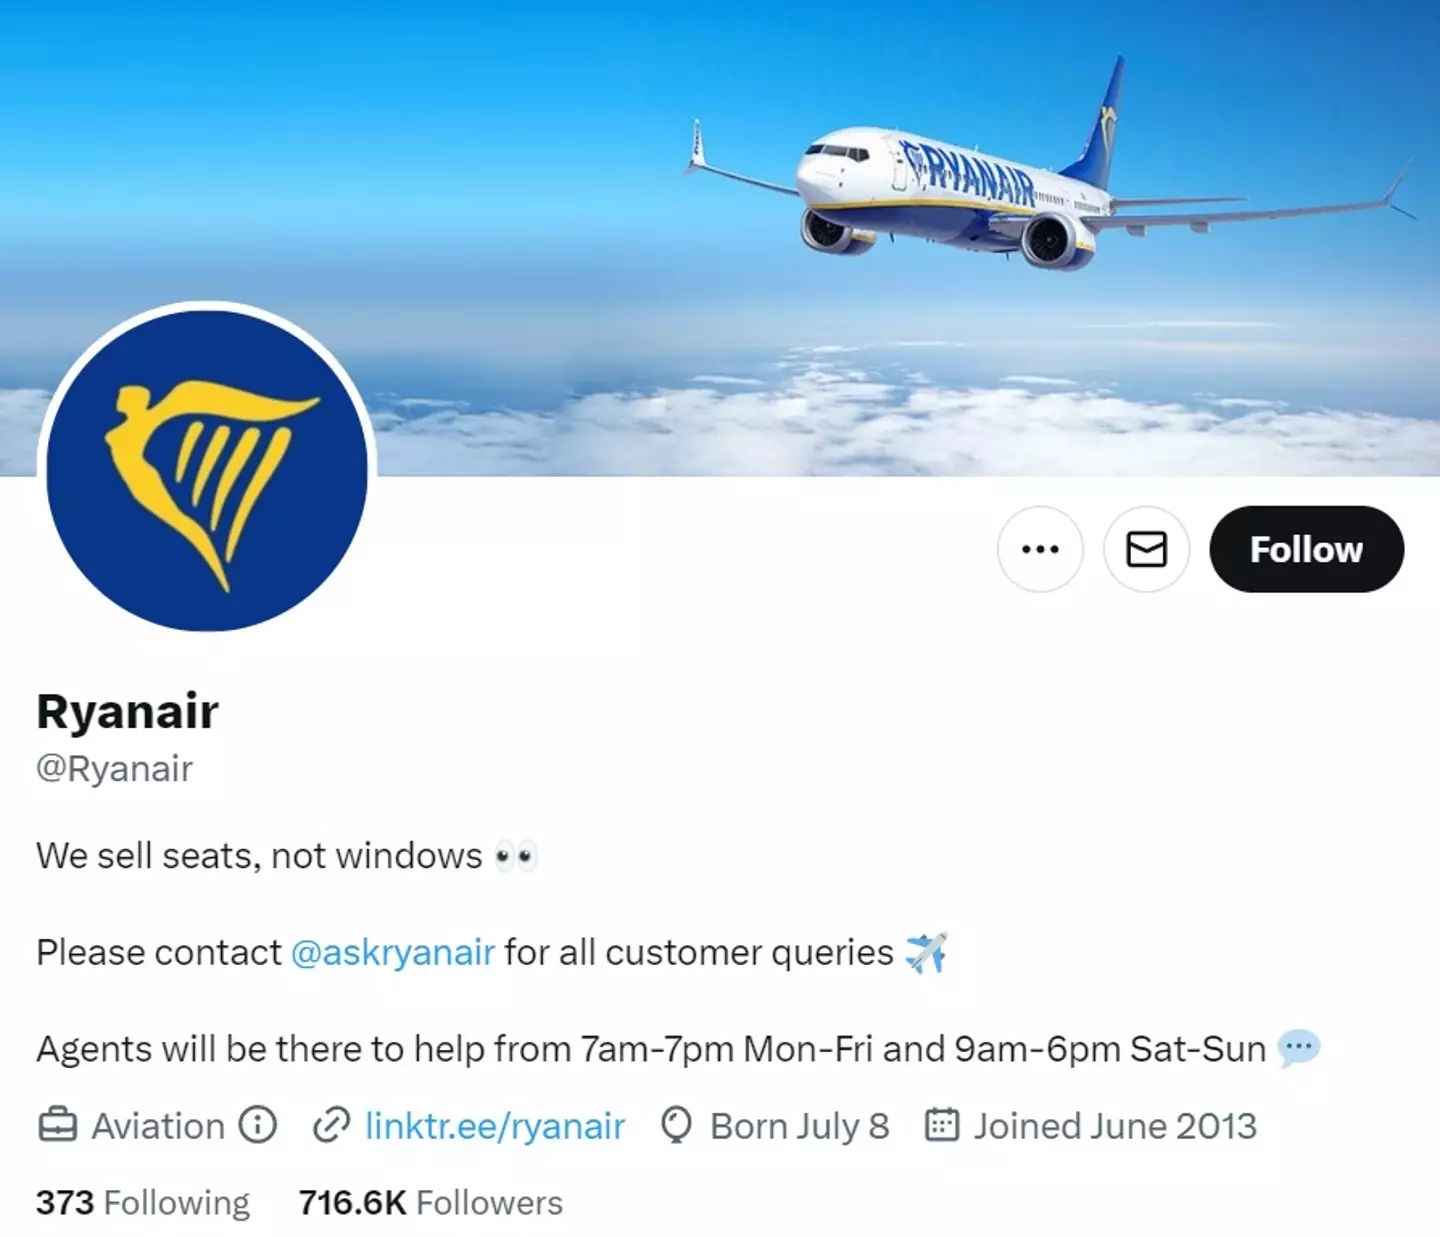 Ryanair would like to remind customers that windows are not a guaranteed part of its flight experience.